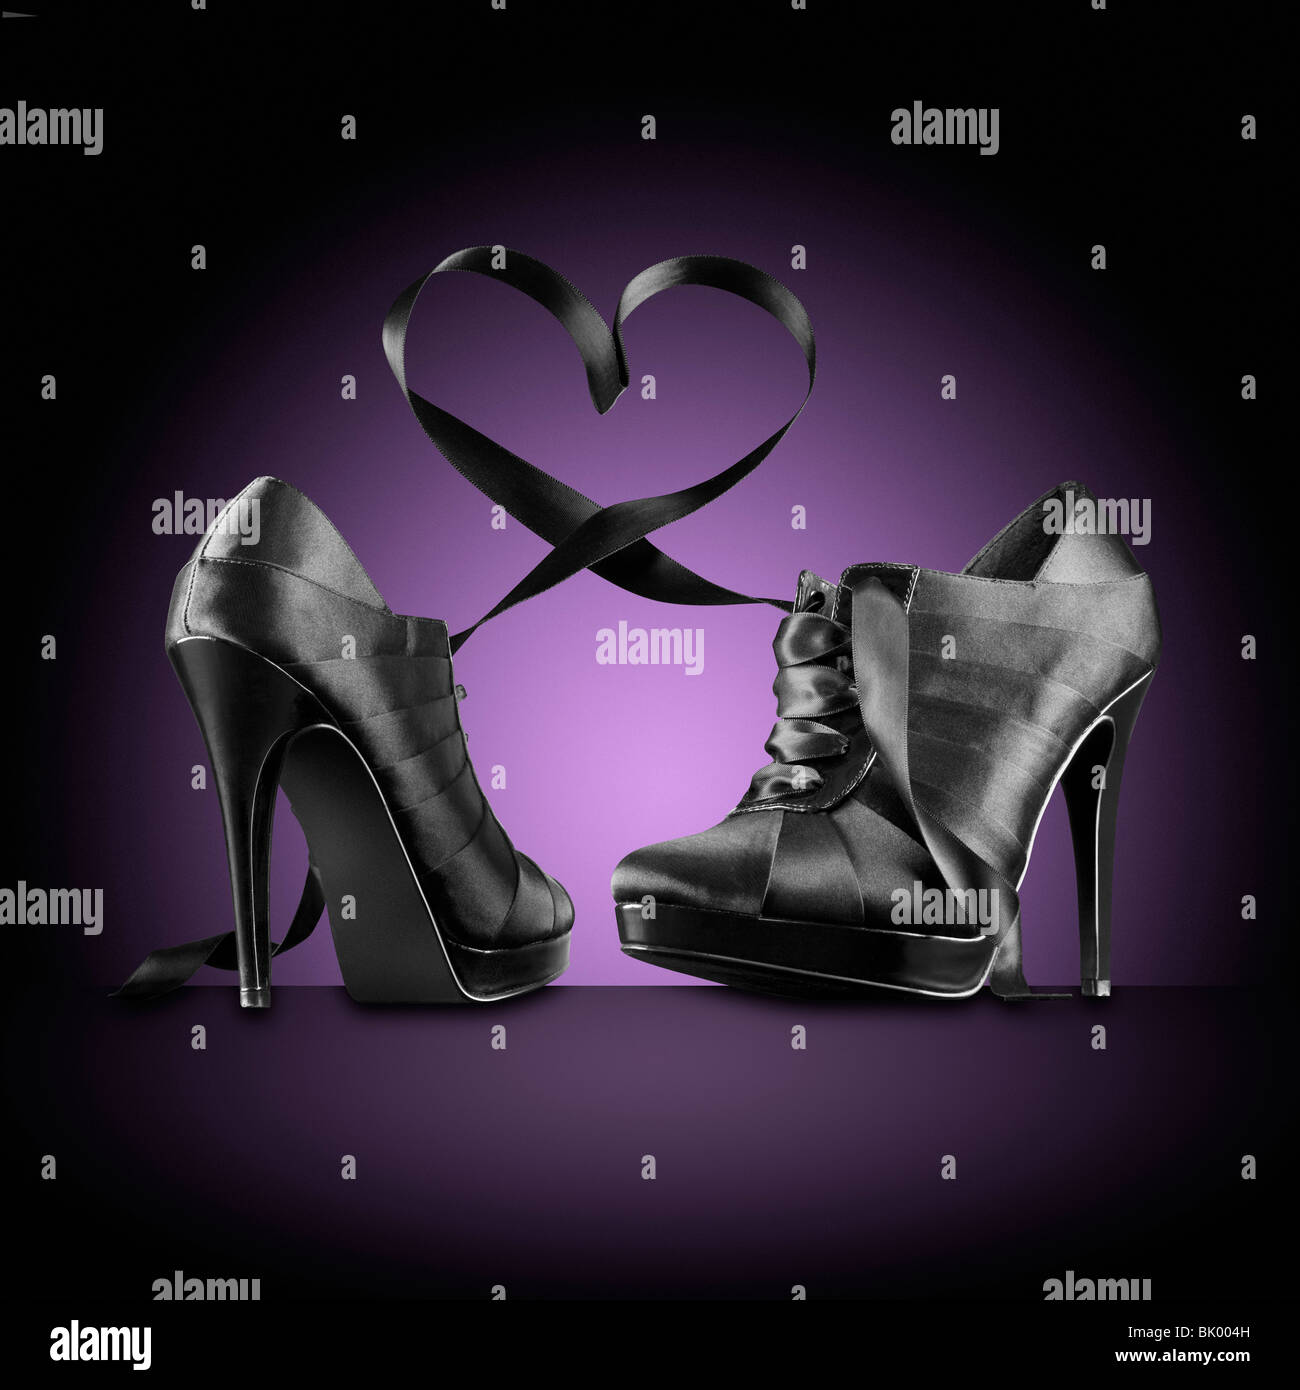 Very high black stiletto heels with the laces forming a heart shape above the shoes. The background is purple with a pool of light behind the shoes. Stock Photo